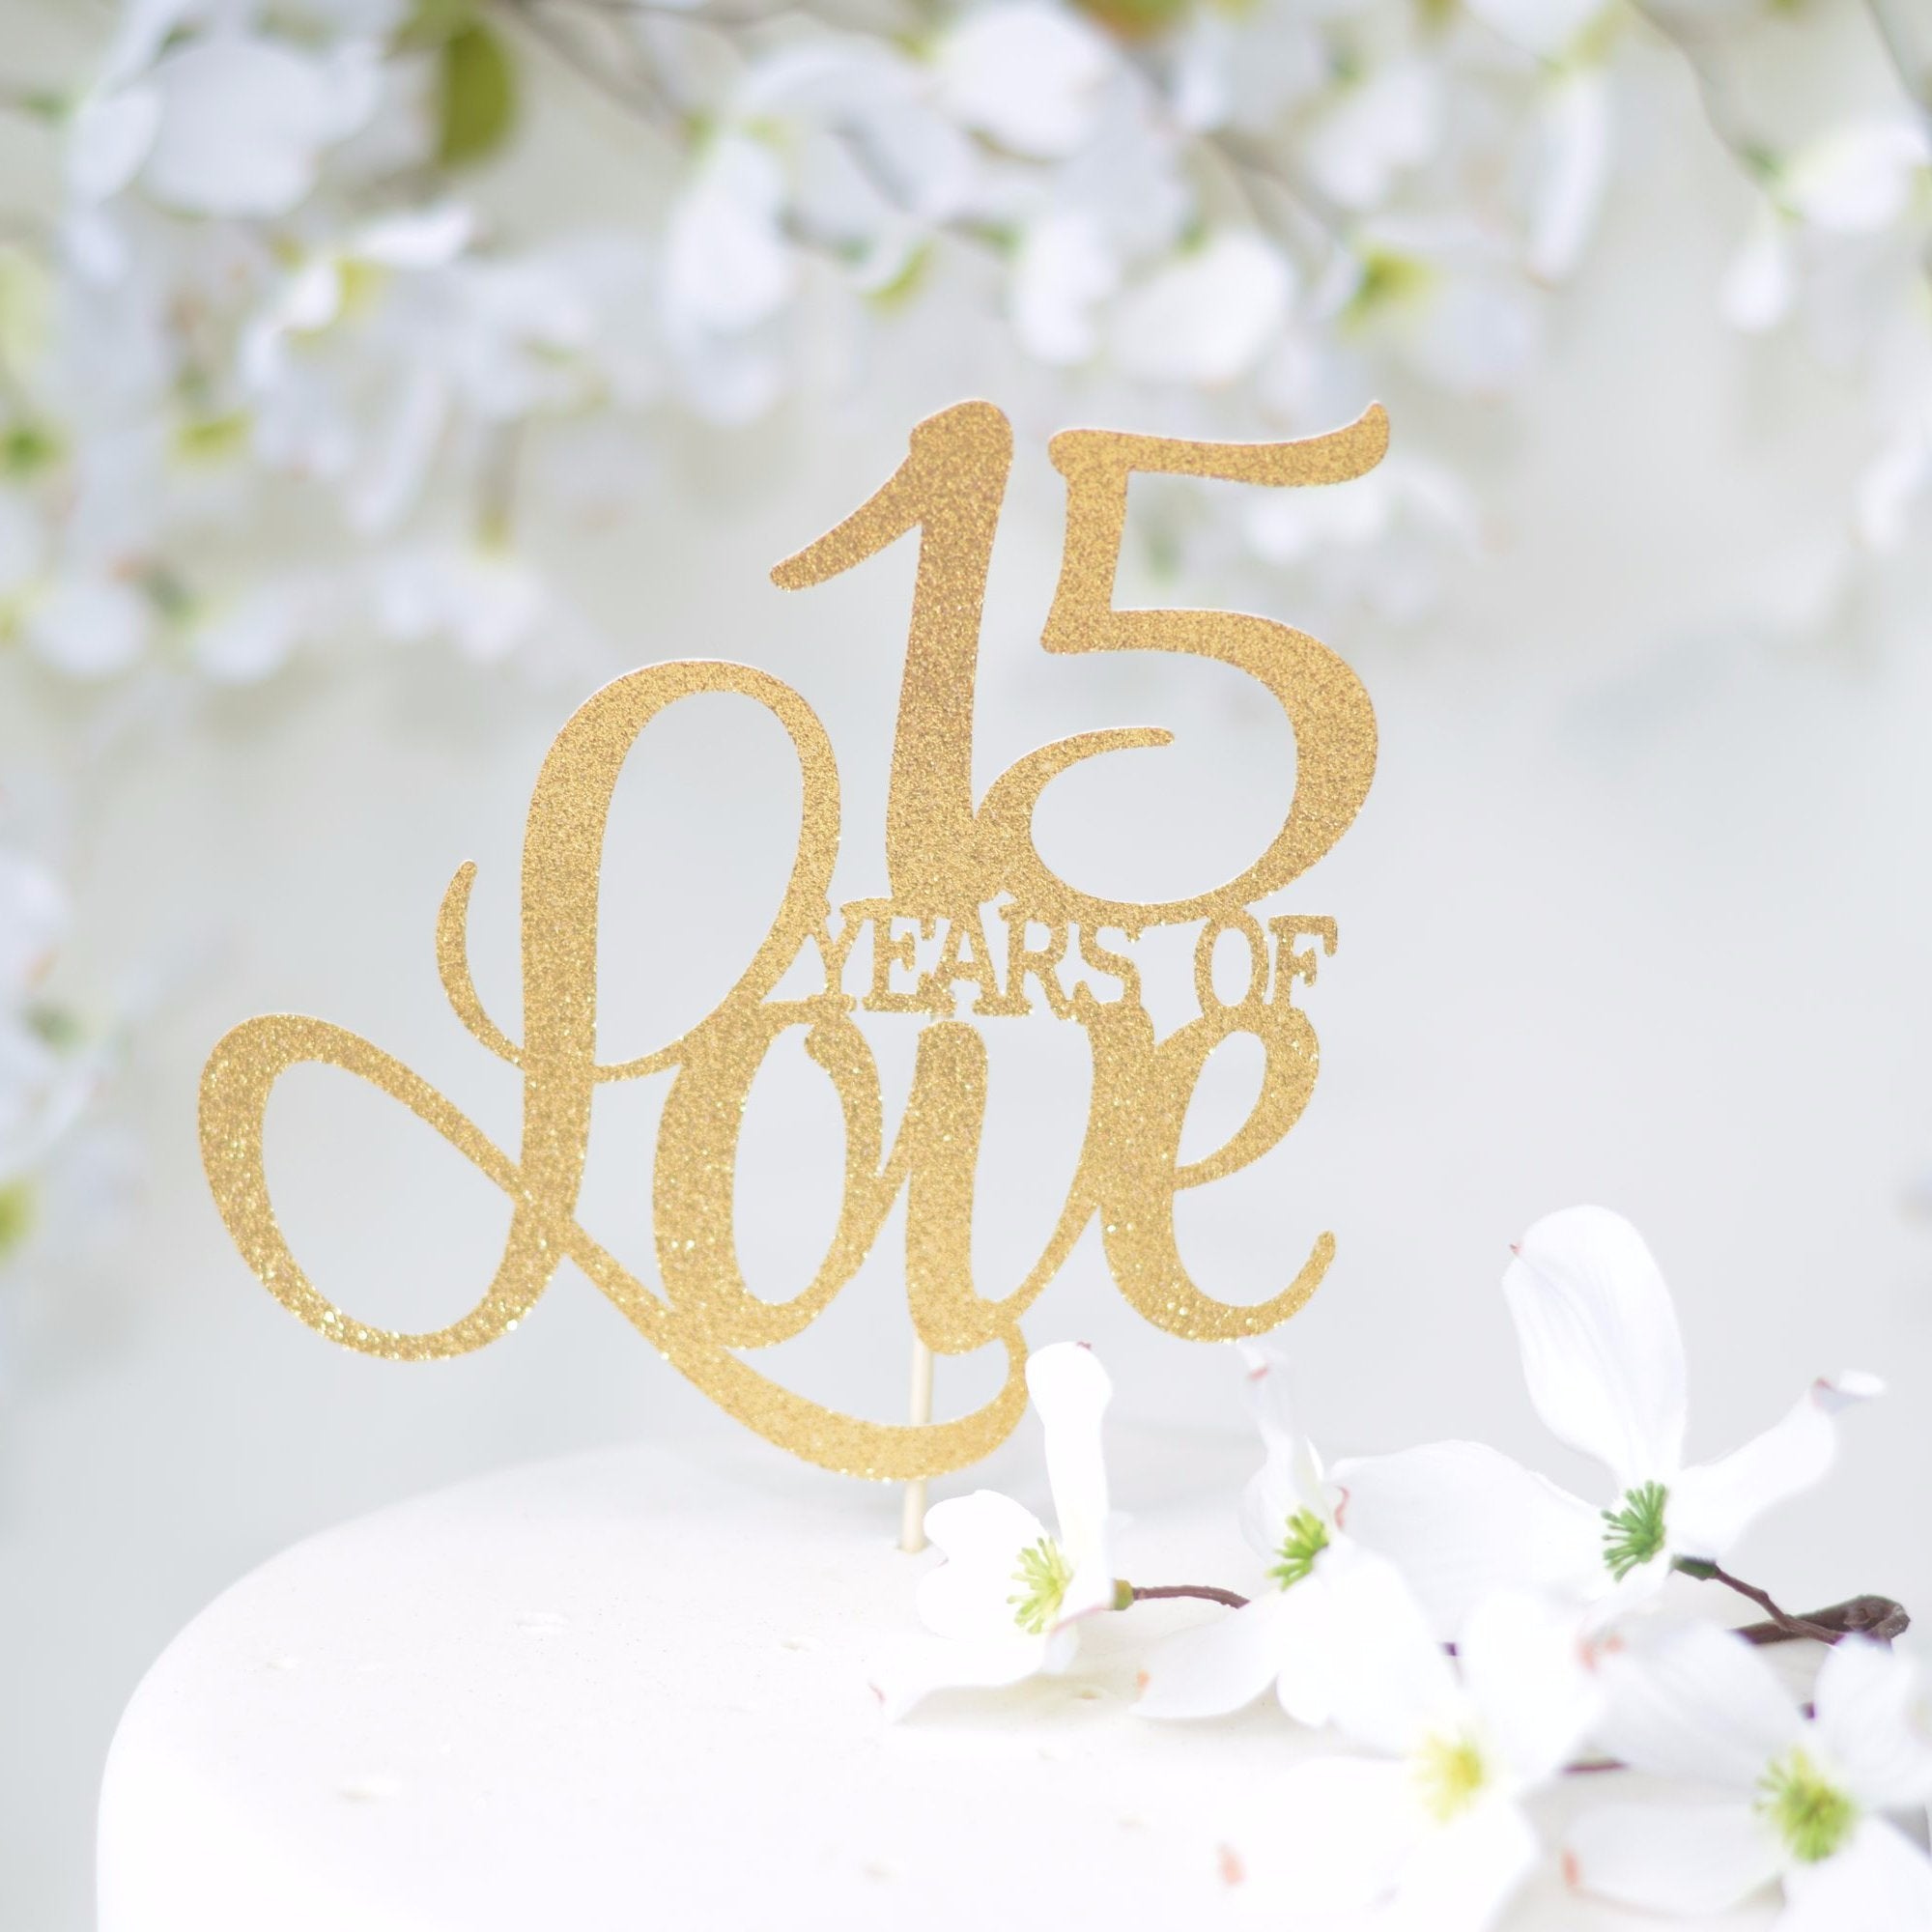 65th Wedding Anniversary Cake - Between The Pages Blog